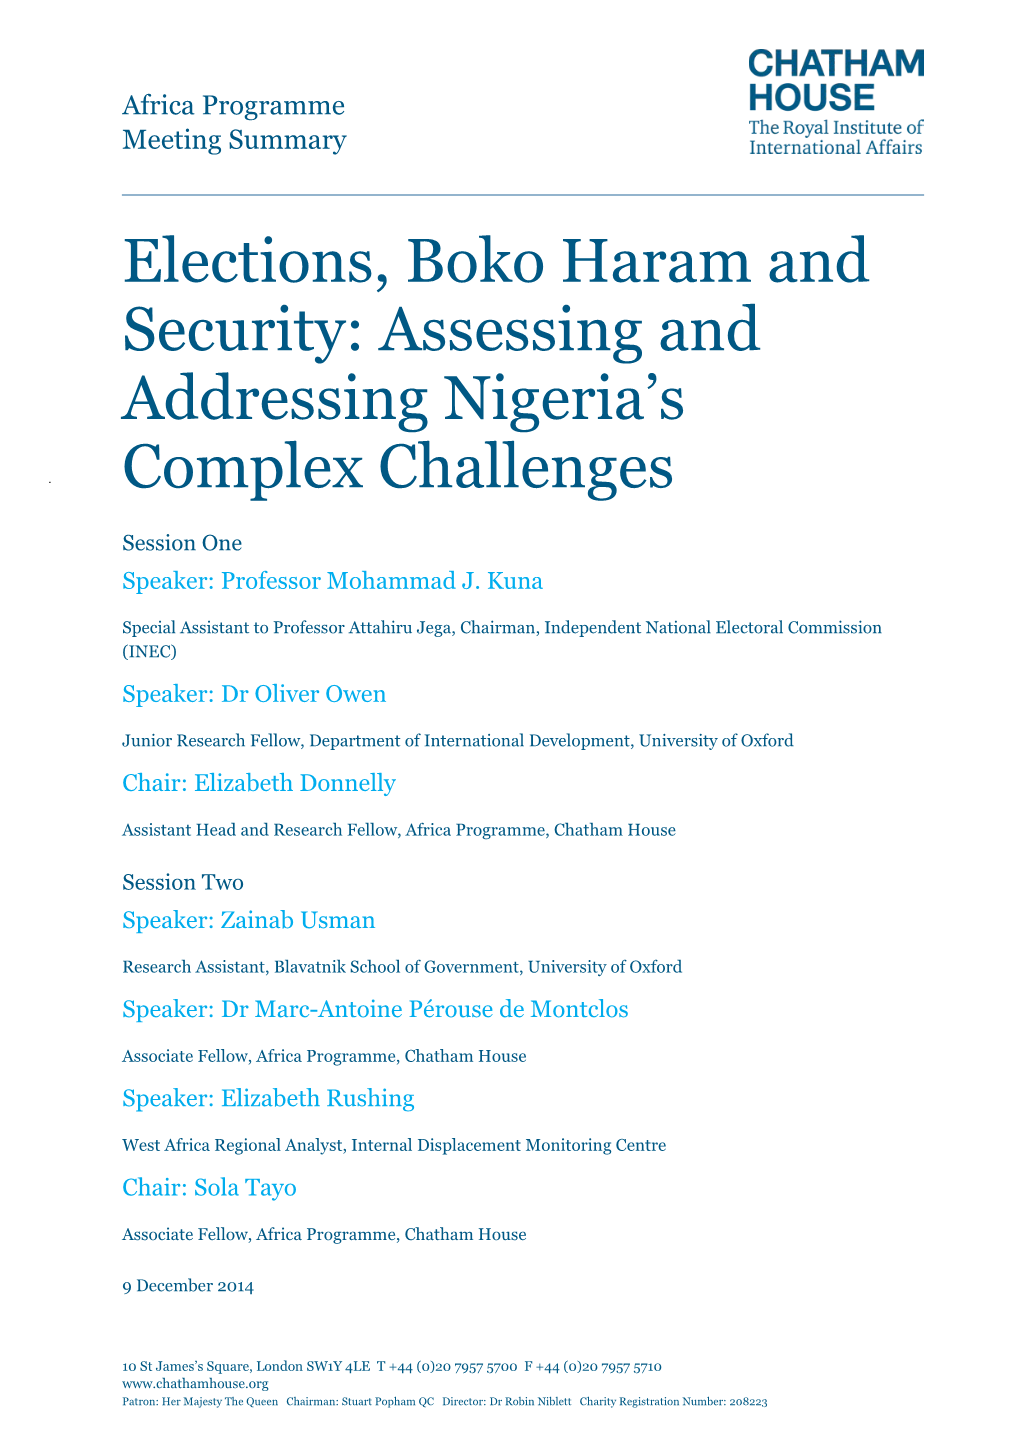 Elections, Boko Haram and Security: Assessing and Addressing Nigeria’S Complex Challenges